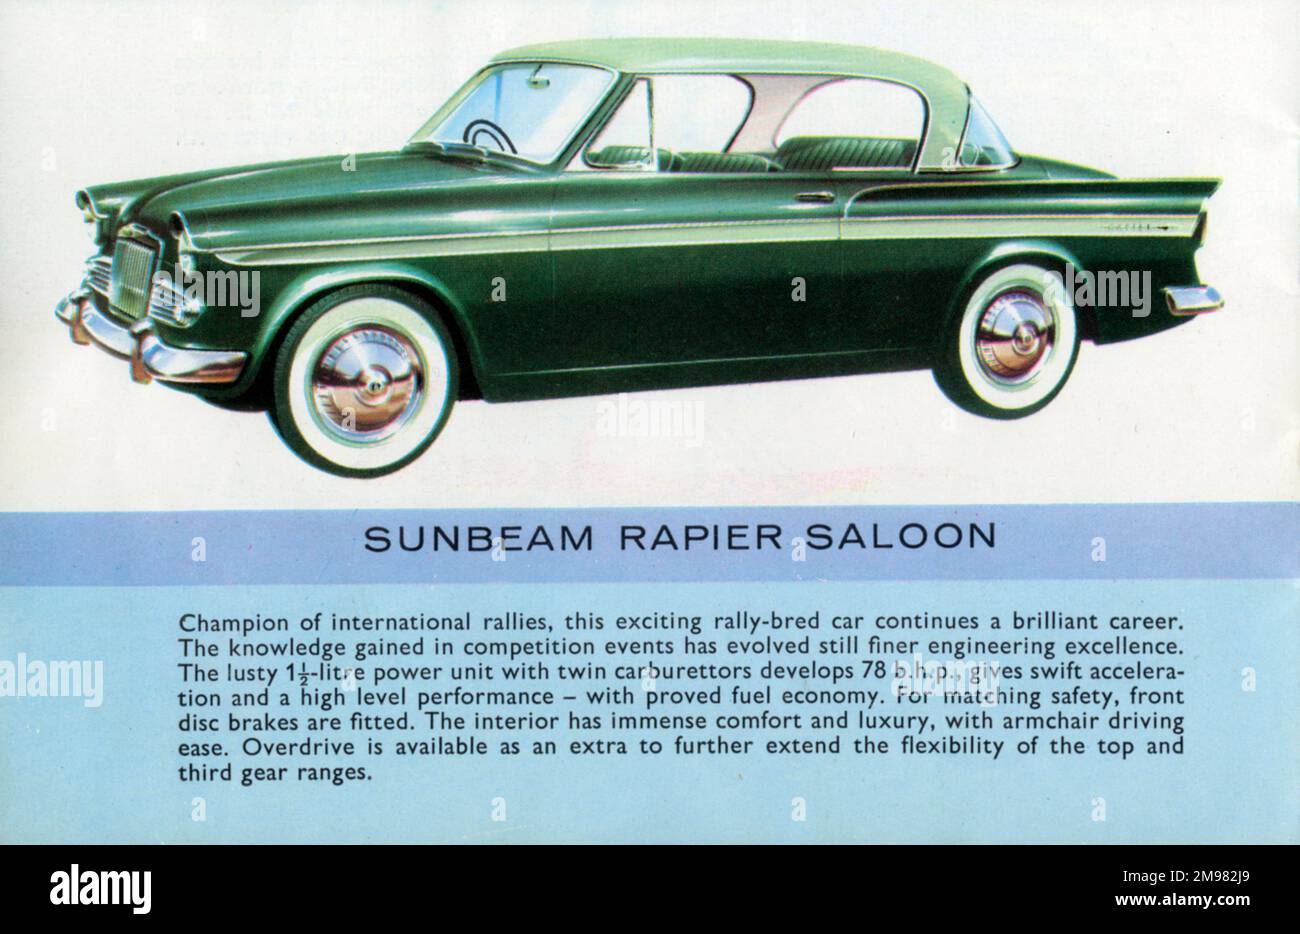 A Sunbeam Rapier Saloon advertised in a Humber, Hillman and Sunbeam Rootes Motors Limited brochure Stock Photo